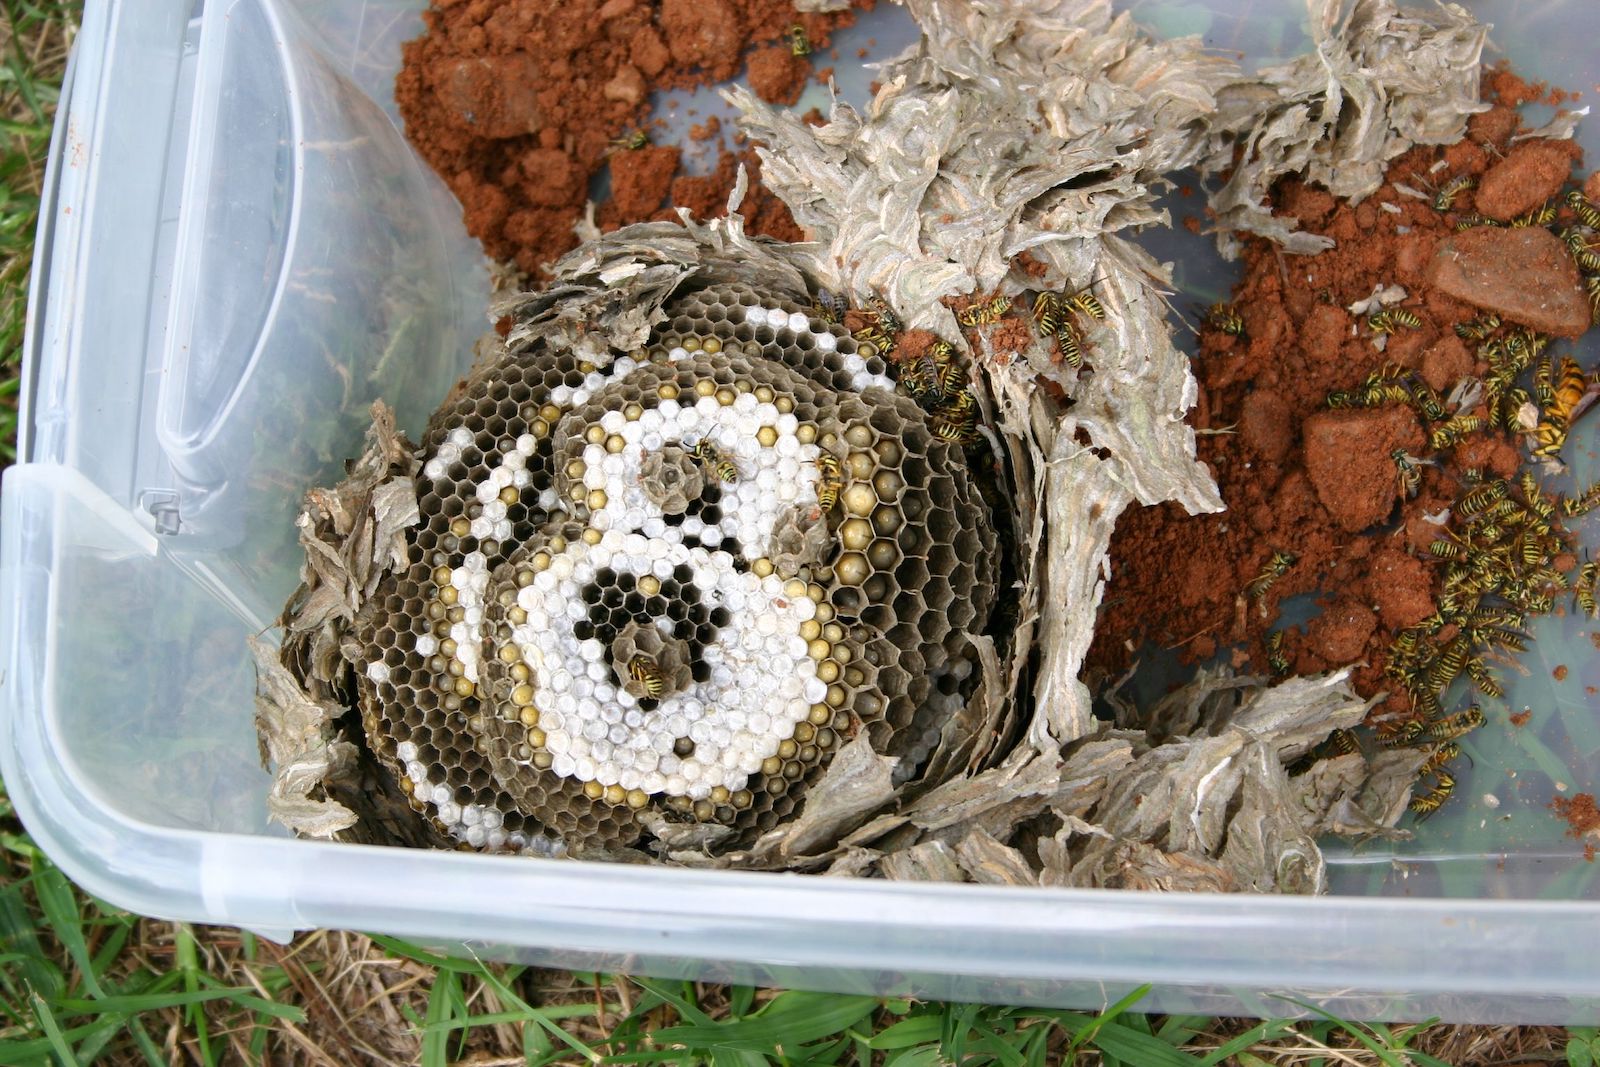 Researchers collect nests and take them back to the lab.